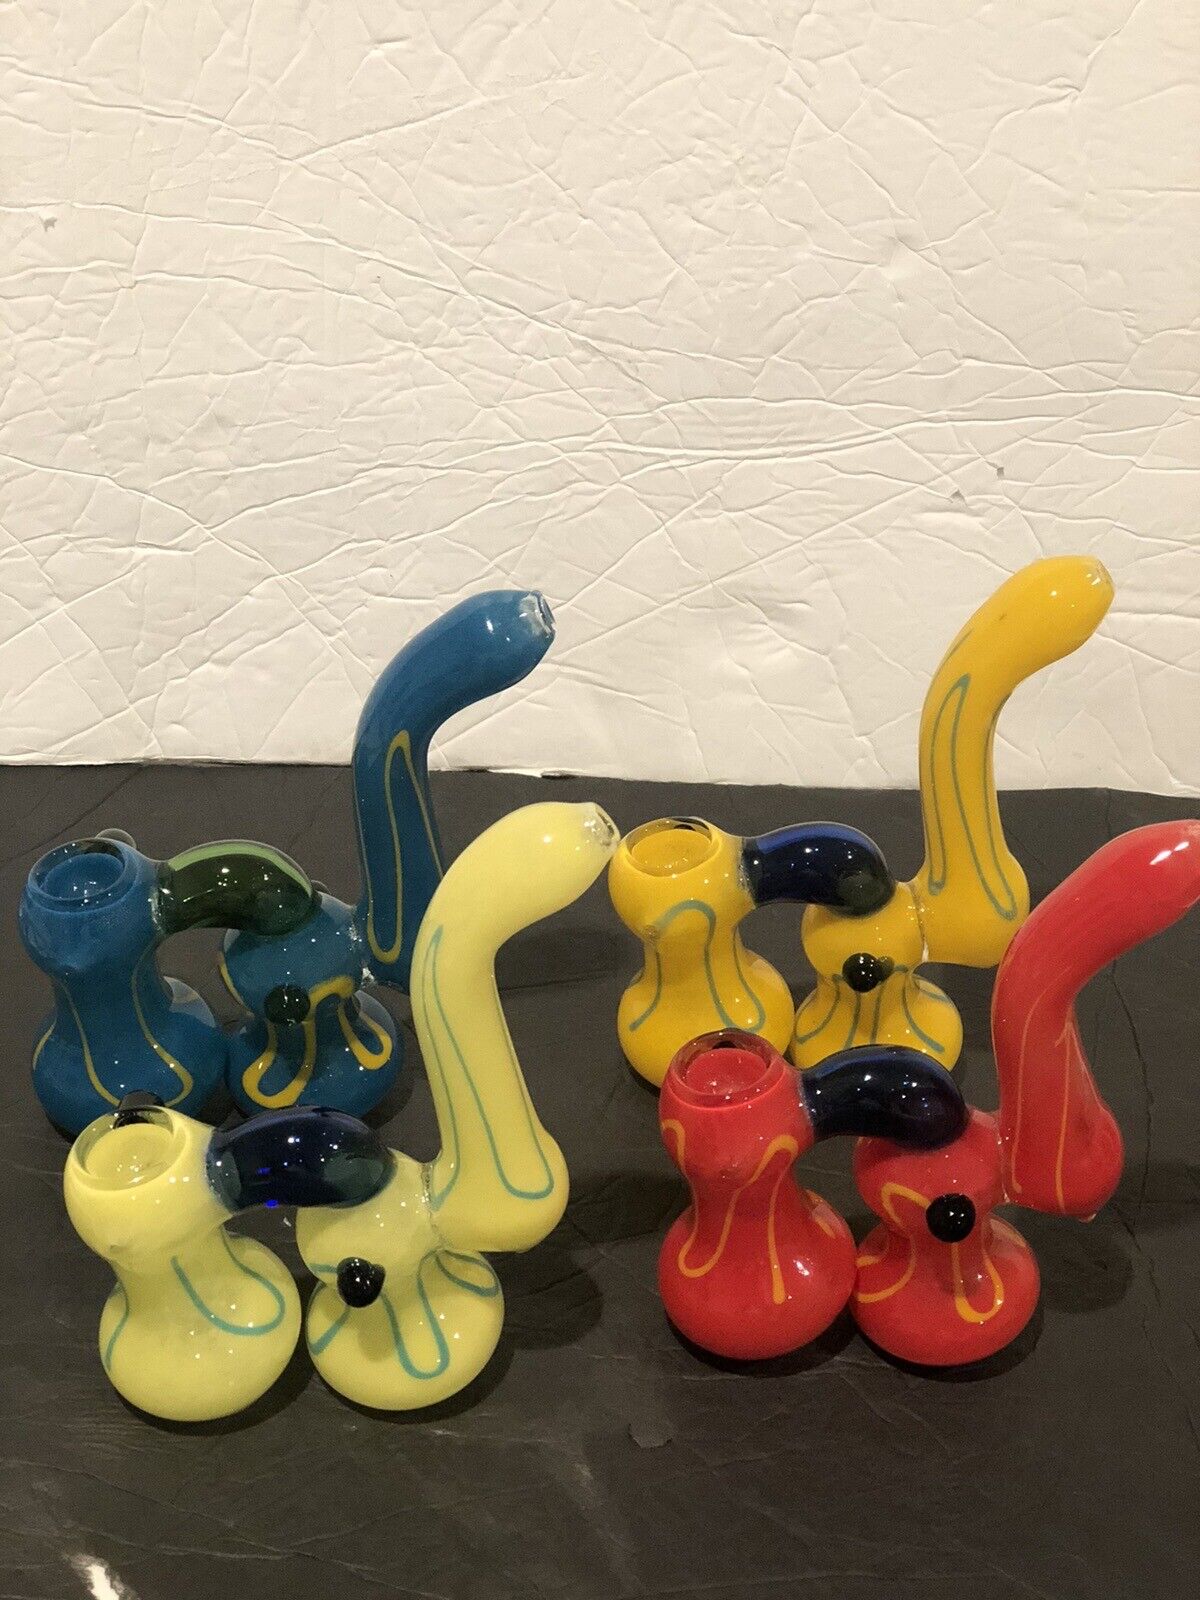 1 Pcs 5” Glass Water Pipe Double Chamber Tobacco Bubbler Bong Assorted Color. Available Now for 13.95